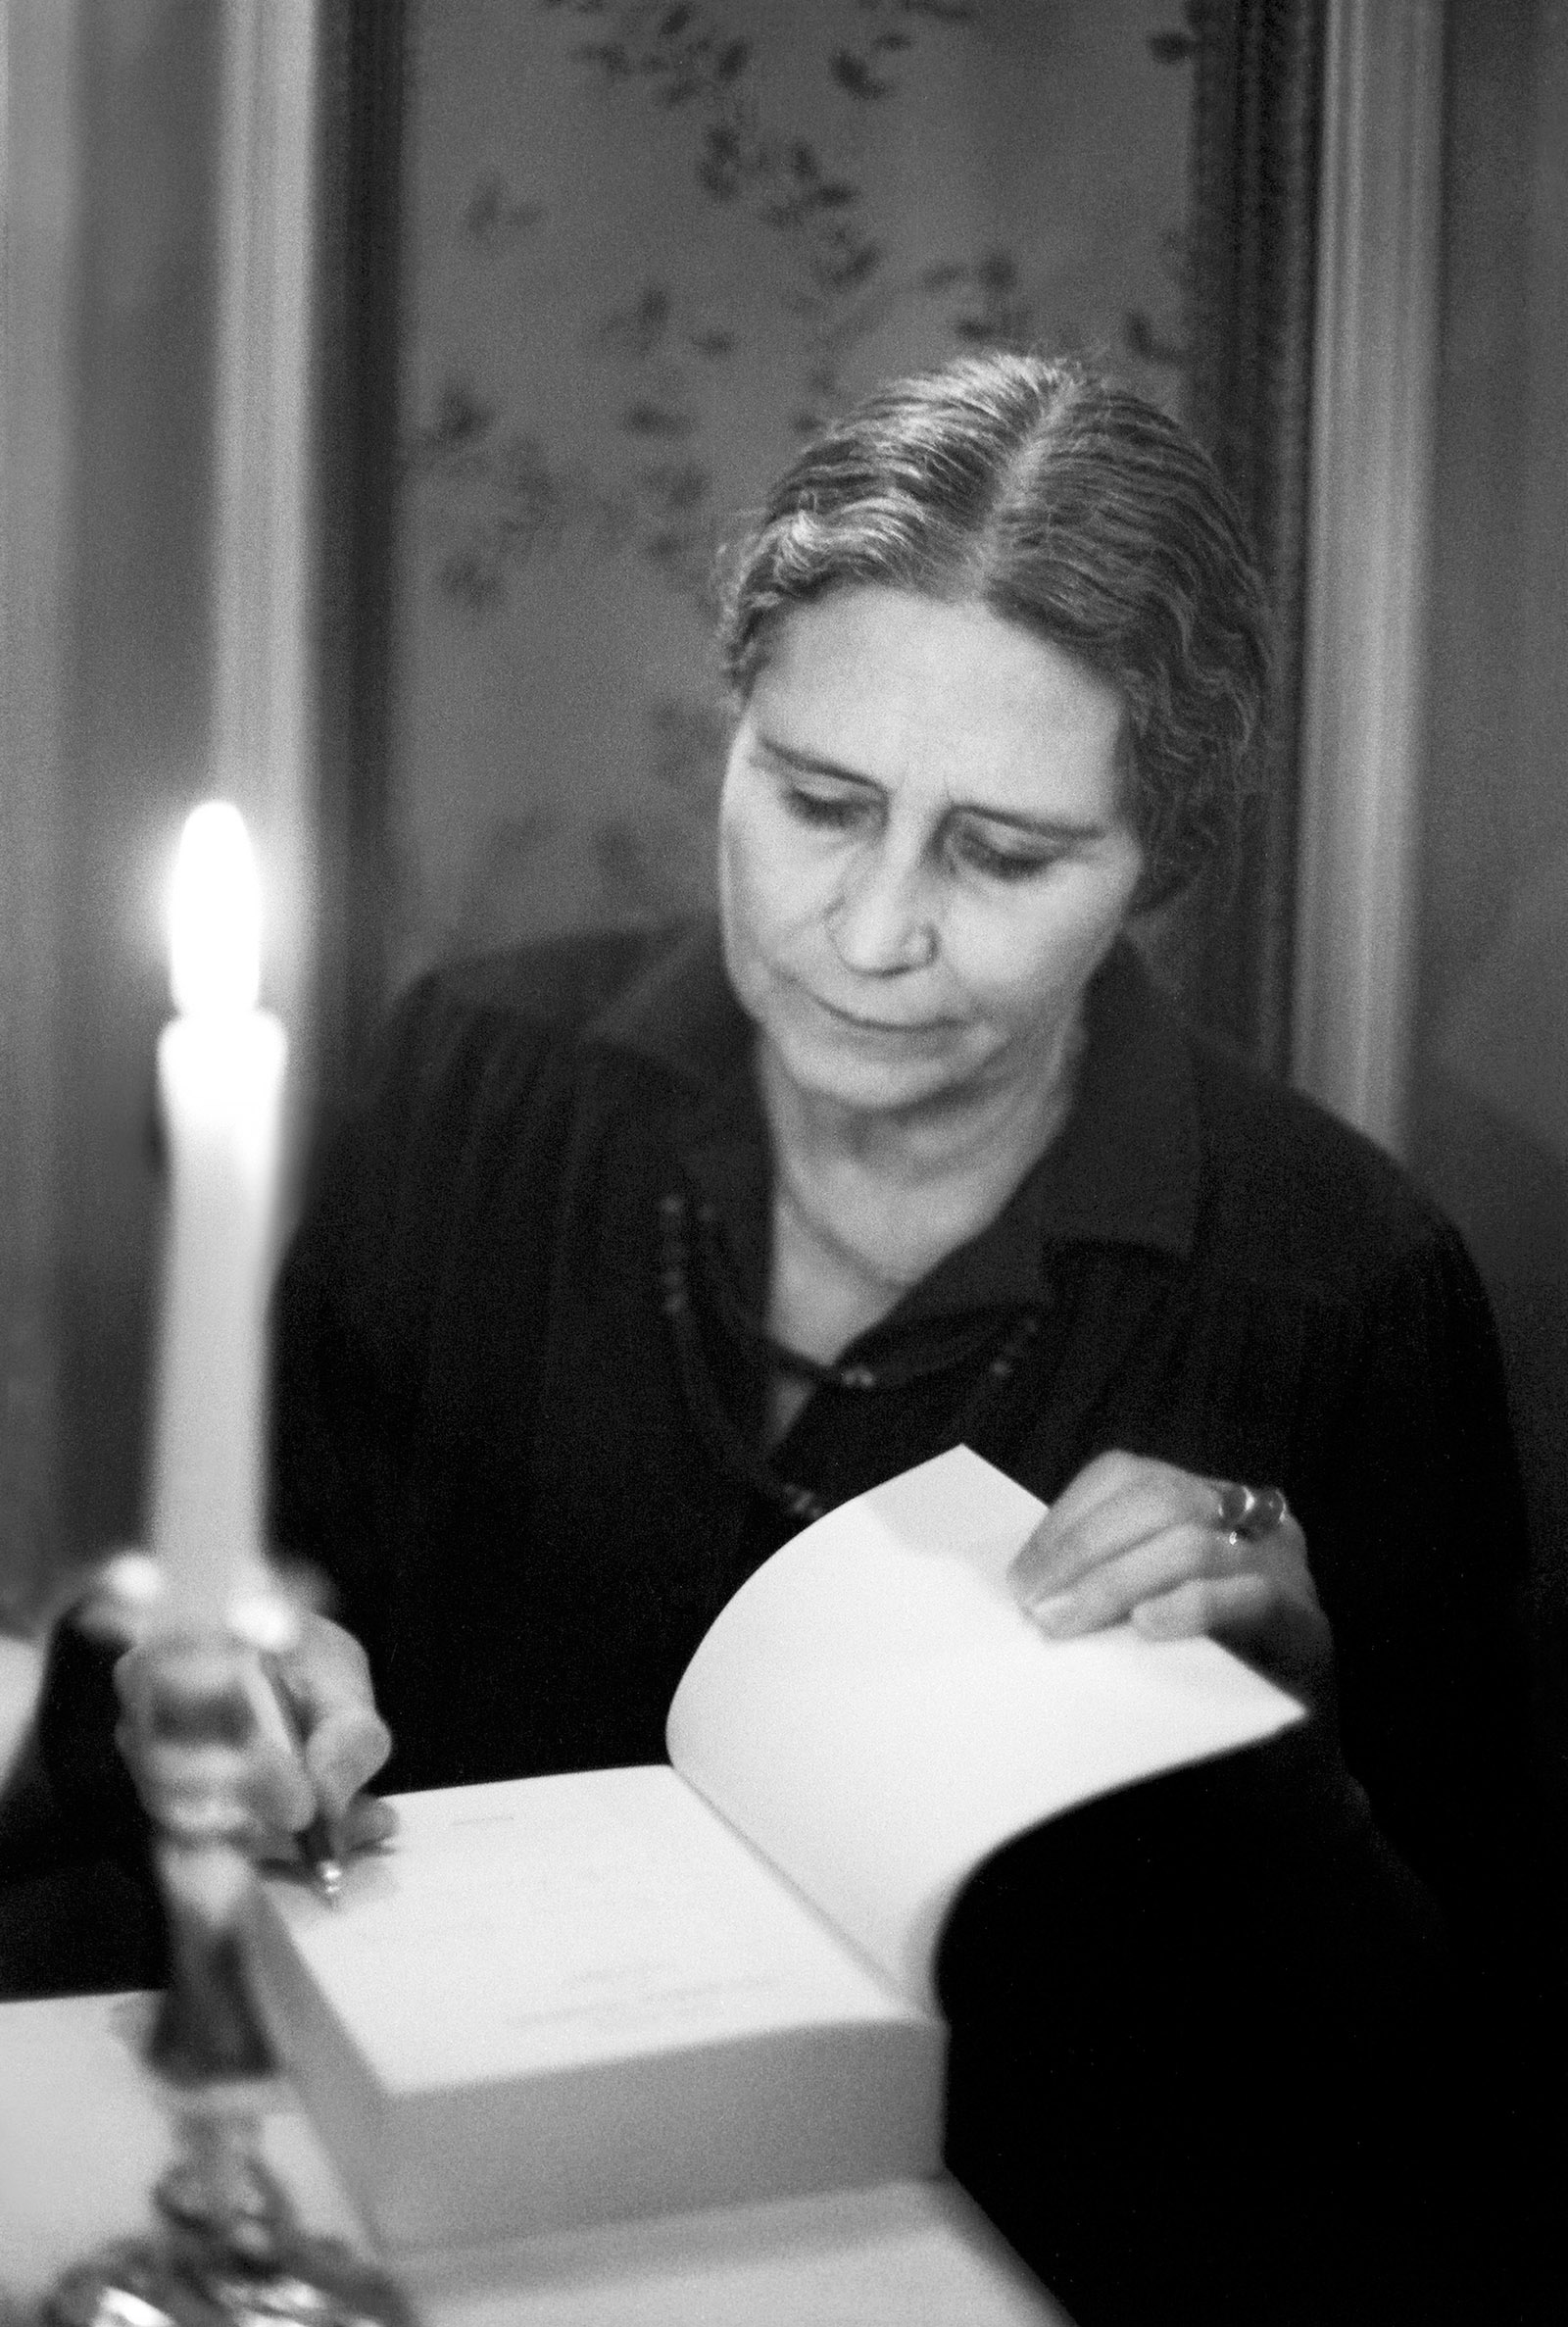 Doris Lessing at the Frankfurt Book Fair, 1981; photograph by Isolde Ohlbaum from her book Lesen & Schreiben, published by Ars Vivendi last year